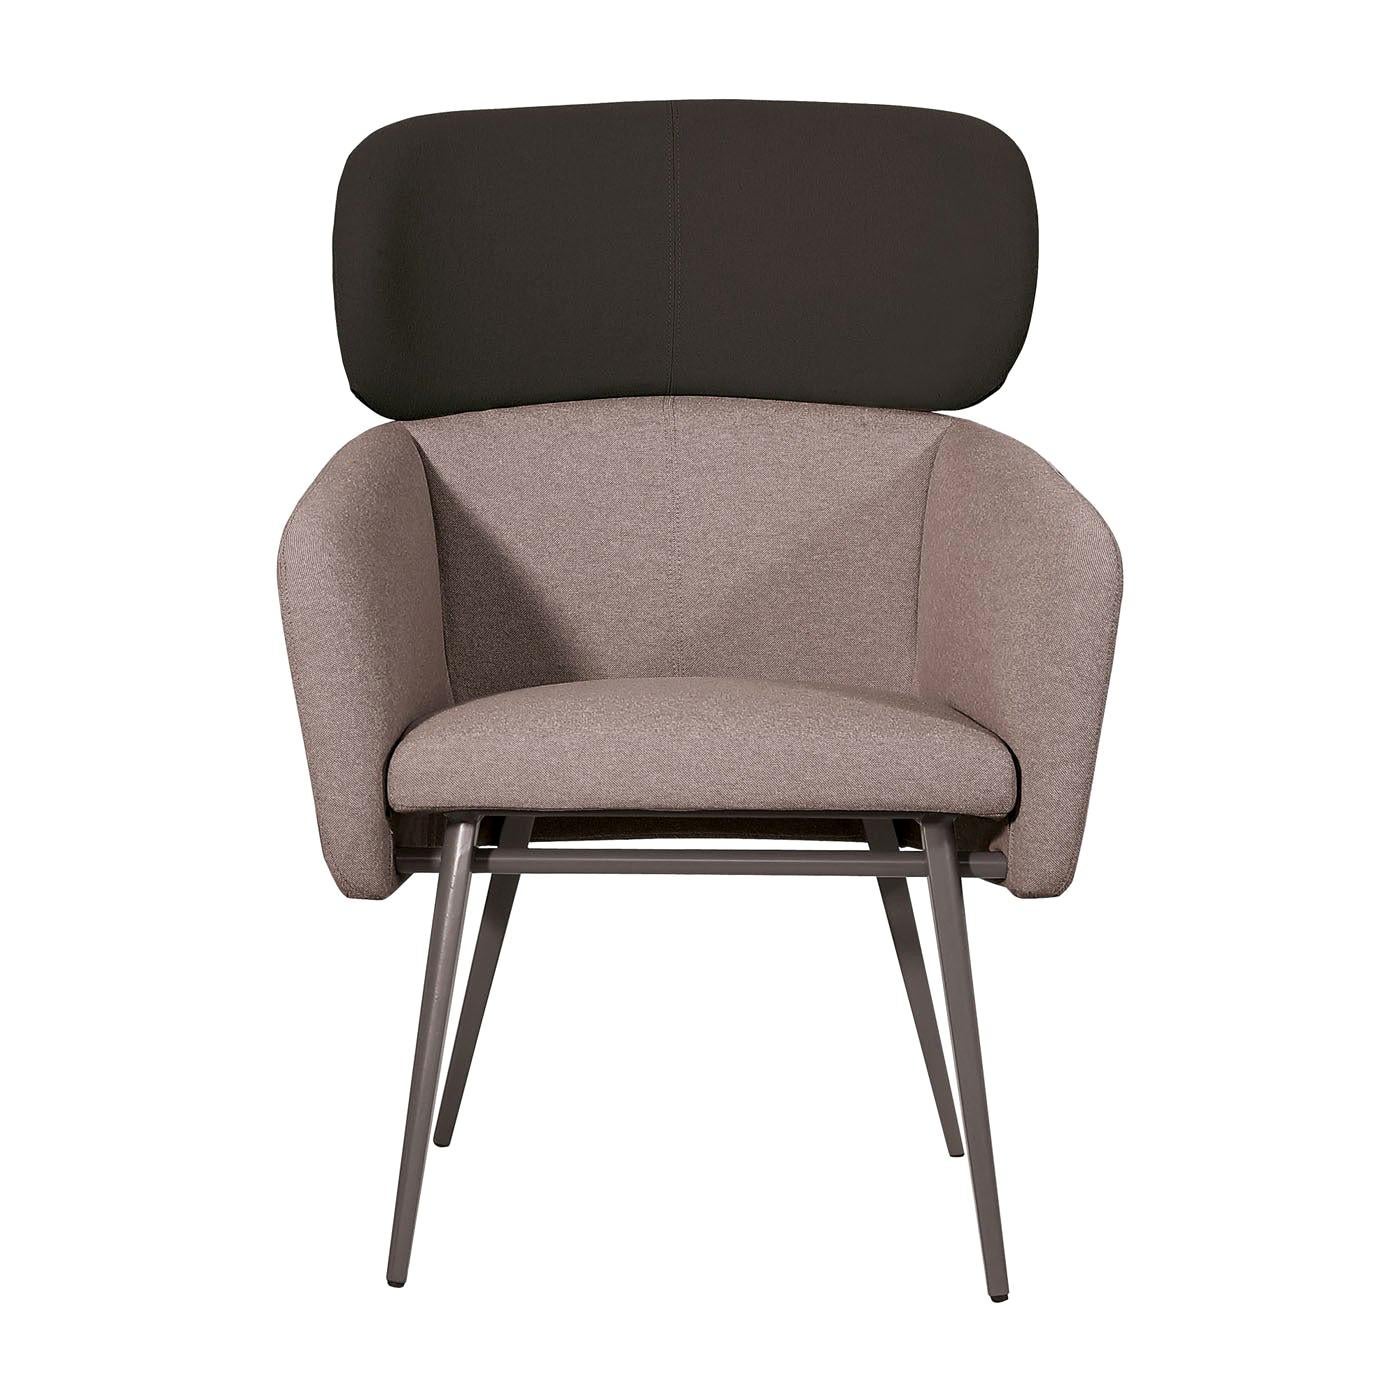 Balù XL Met Gray and Black Chair by Emilio Nanni For Sale